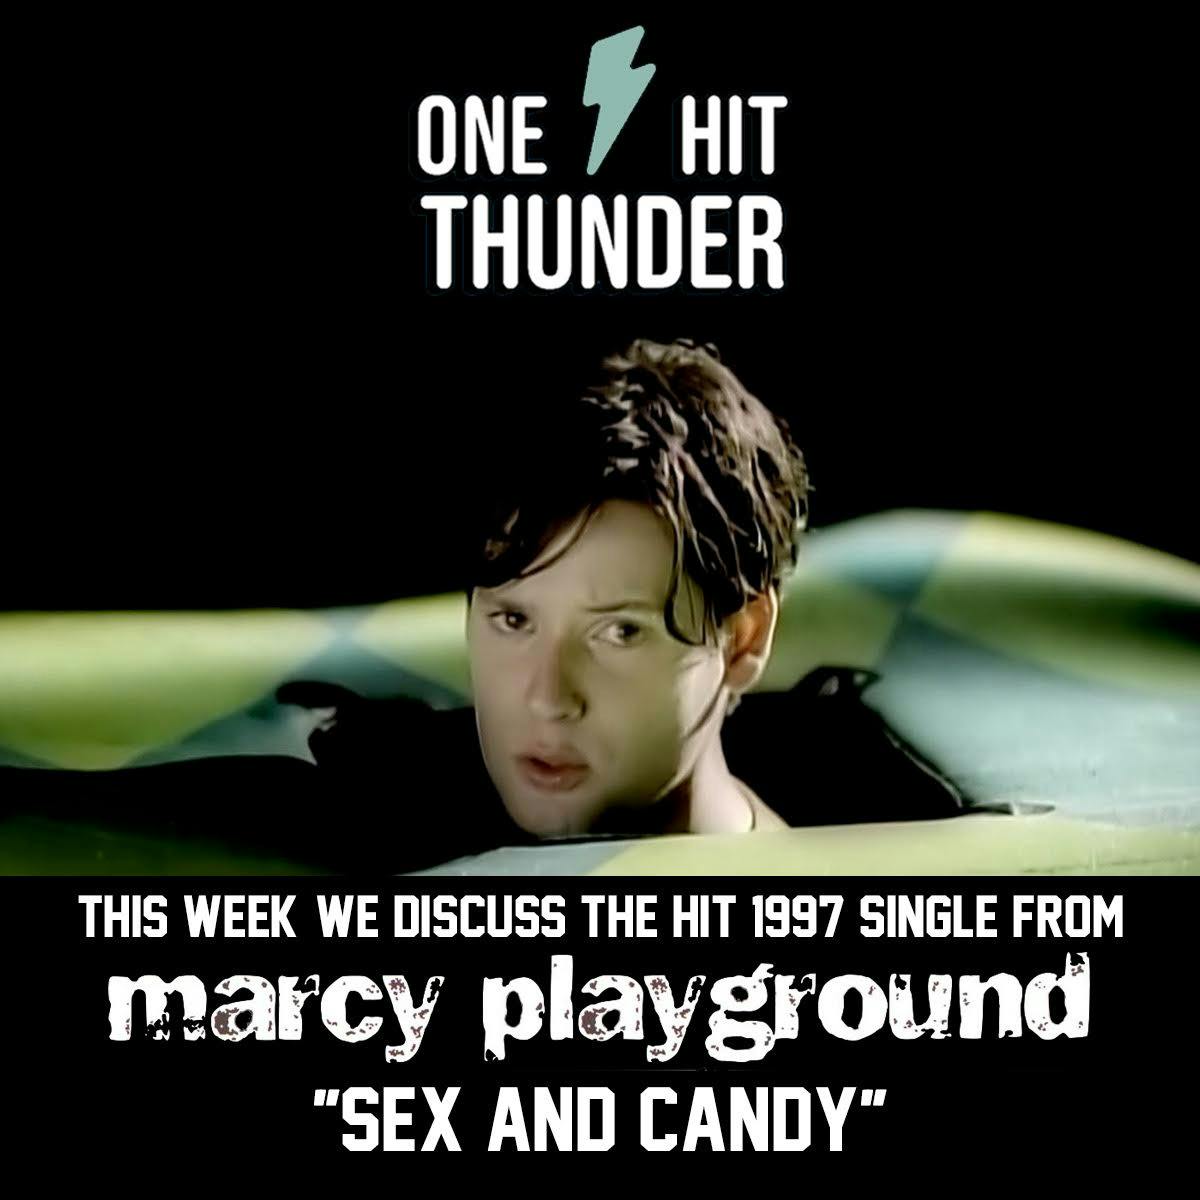 ”Sex & Candy” by Marcy Playground